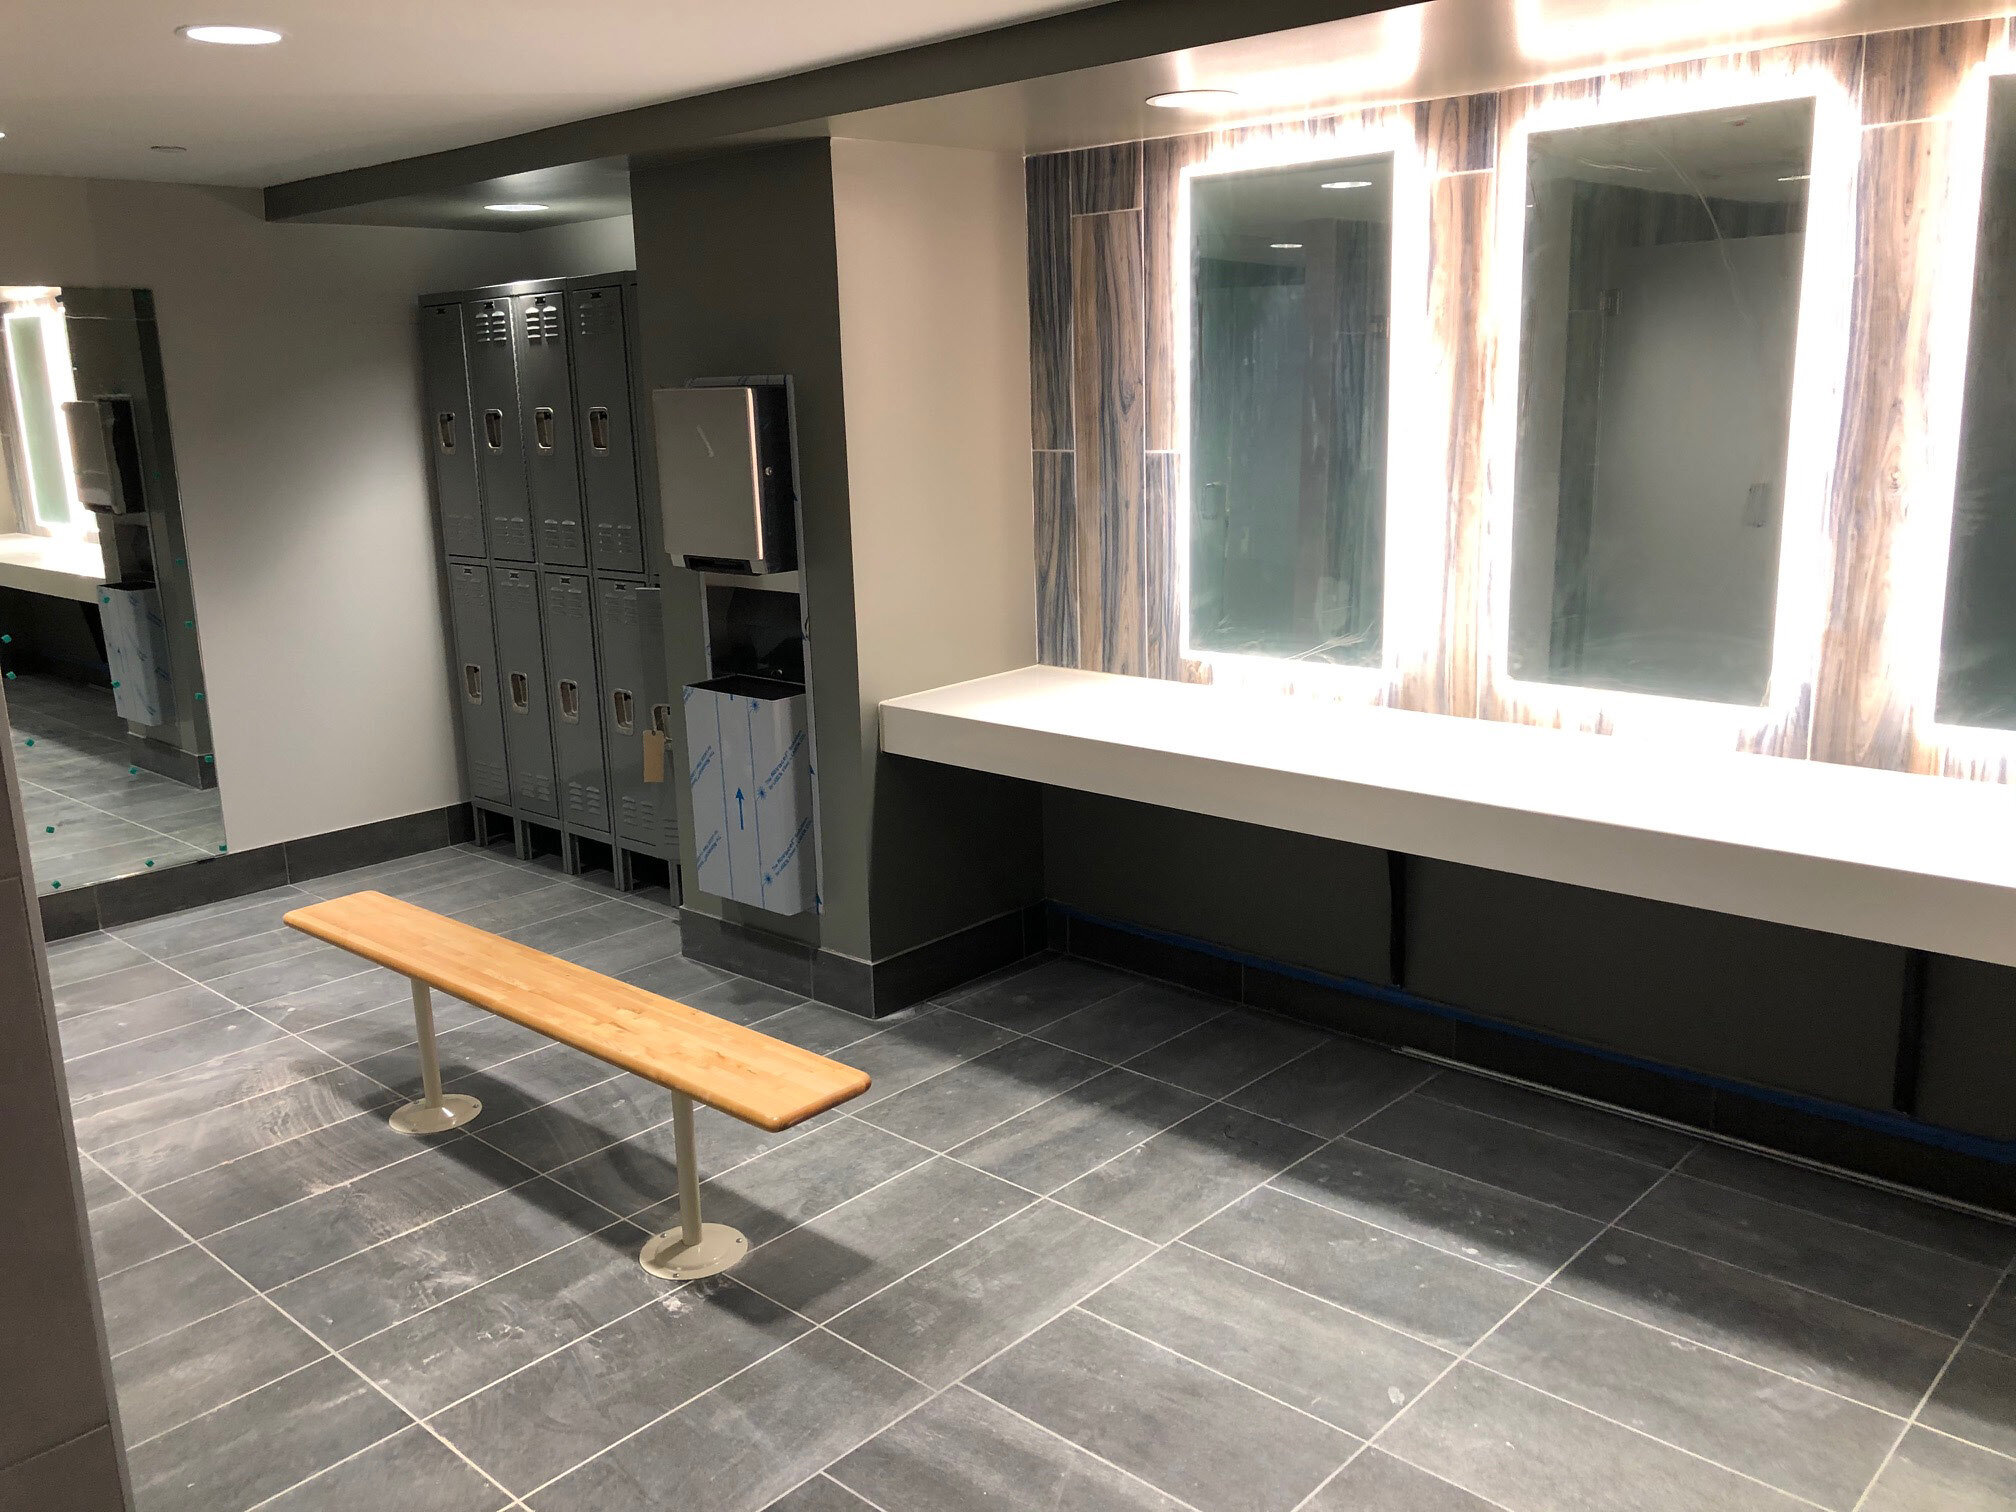  Counter and lighting within the new locker room  